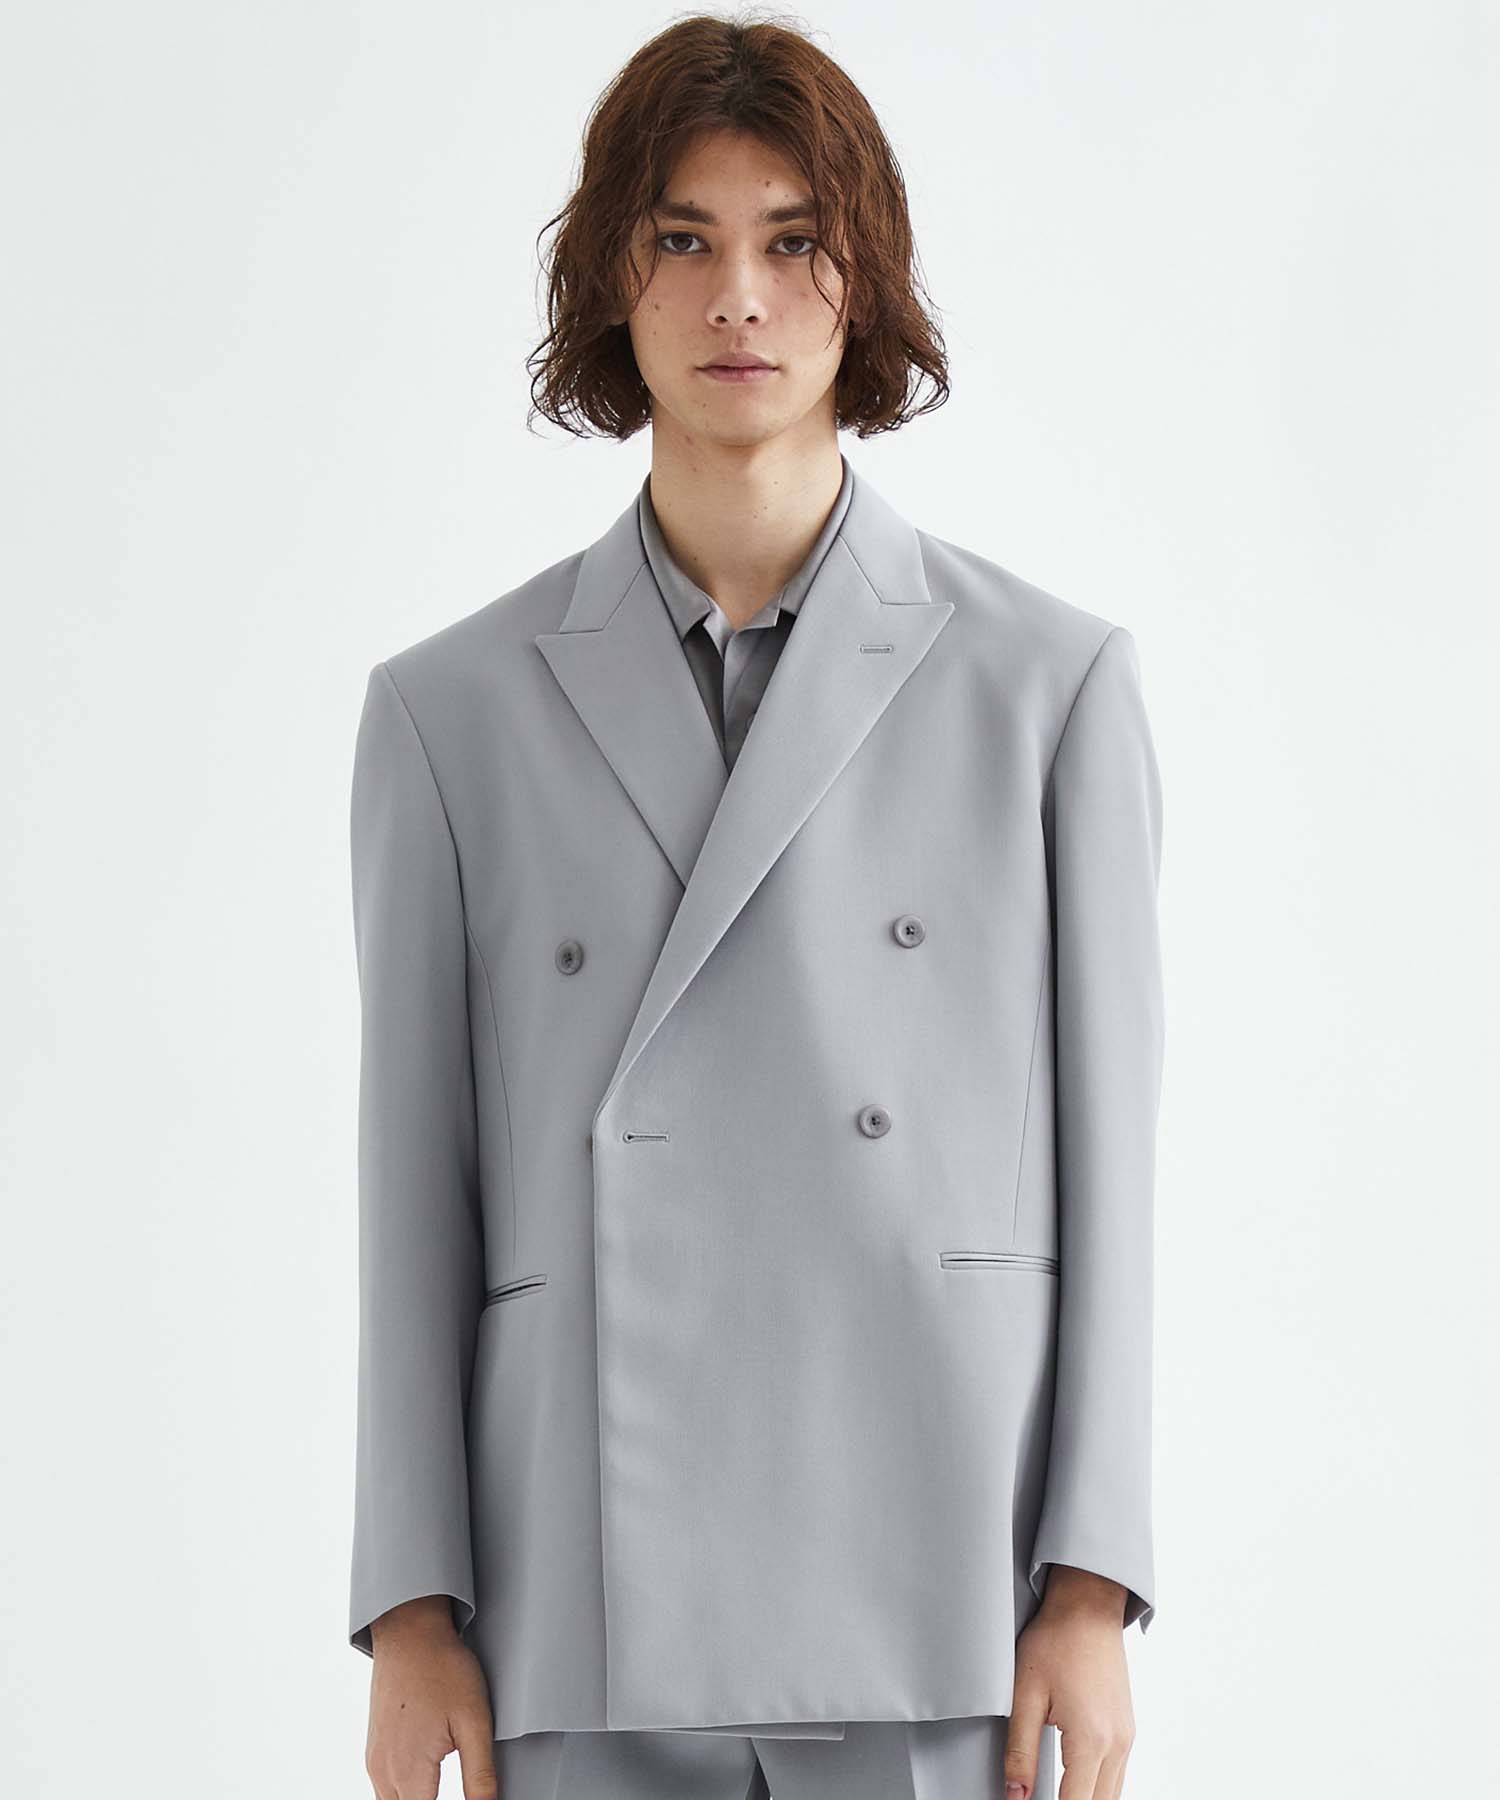 th products / Peaked Lapel Double Jacket